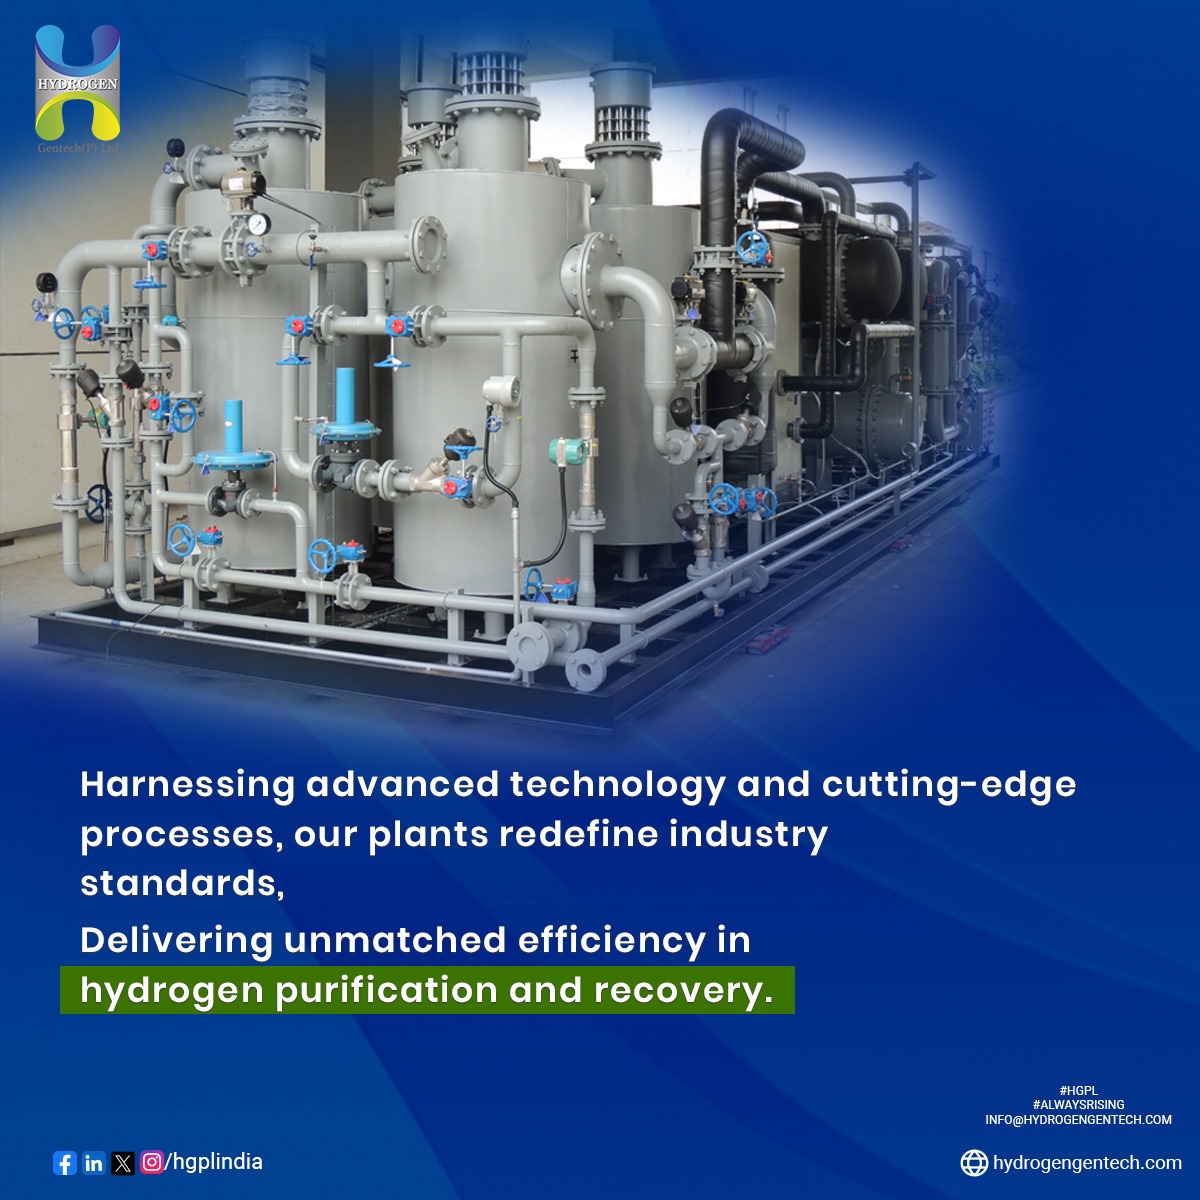 🌟 Harnessing advanced technology and cutting-edge processes, our plants redefine industry standards, delivering unmatched efficiency in hydrogen purification and recovery. 💡 Maximum hydrogen yield and minimal energy consumption, paving the way for a sustainable future.